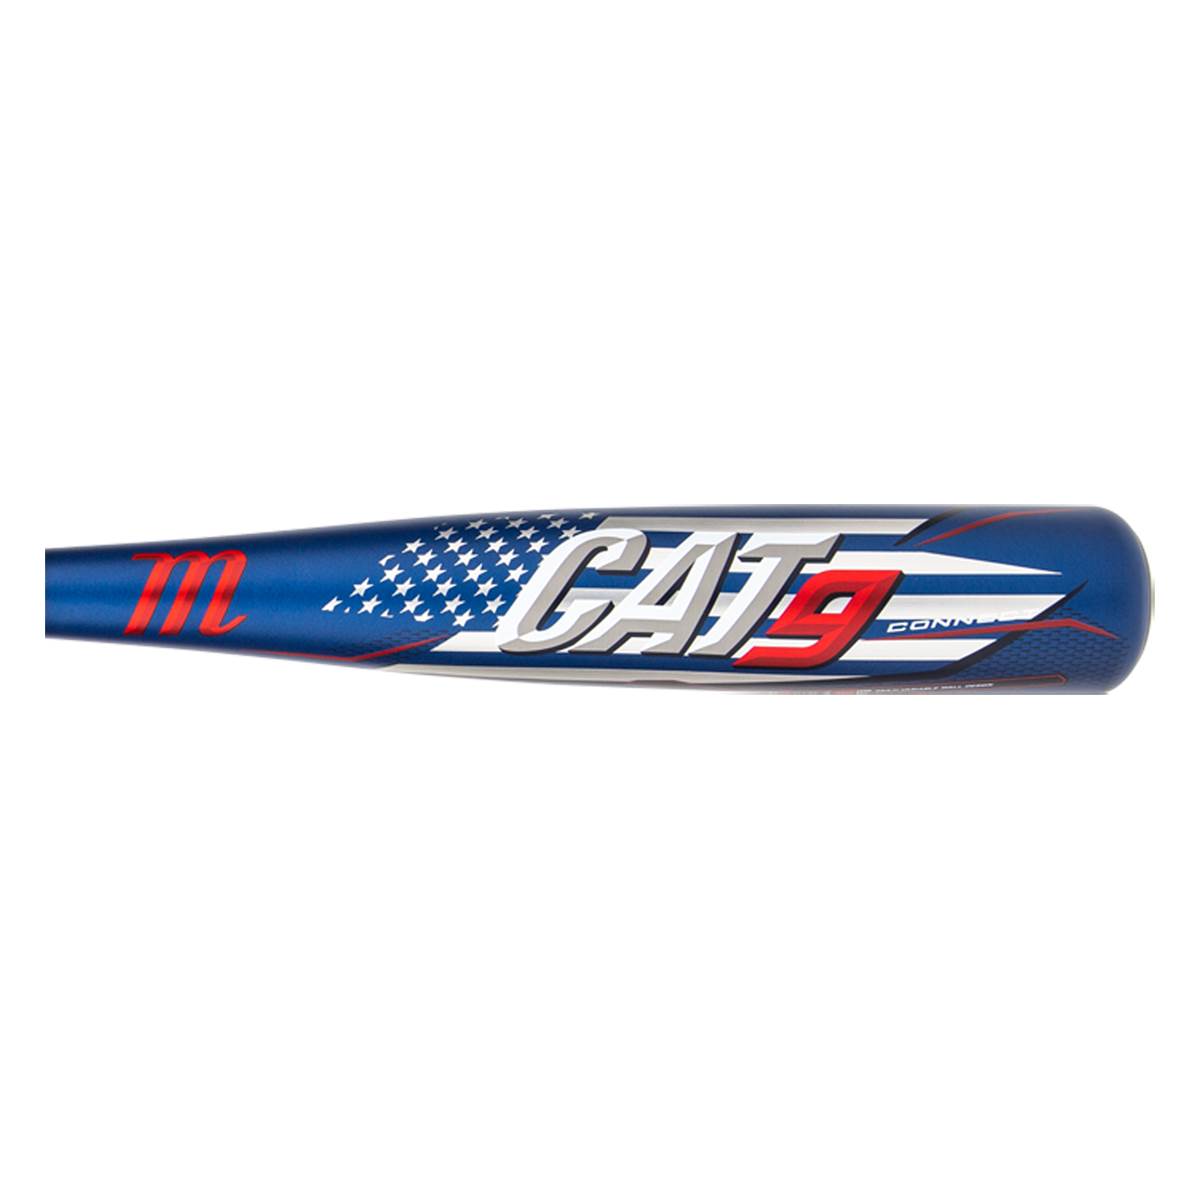 New Marucci CAT9 Connect Pastime -8 USSSA Baseball Bat Blue/Red